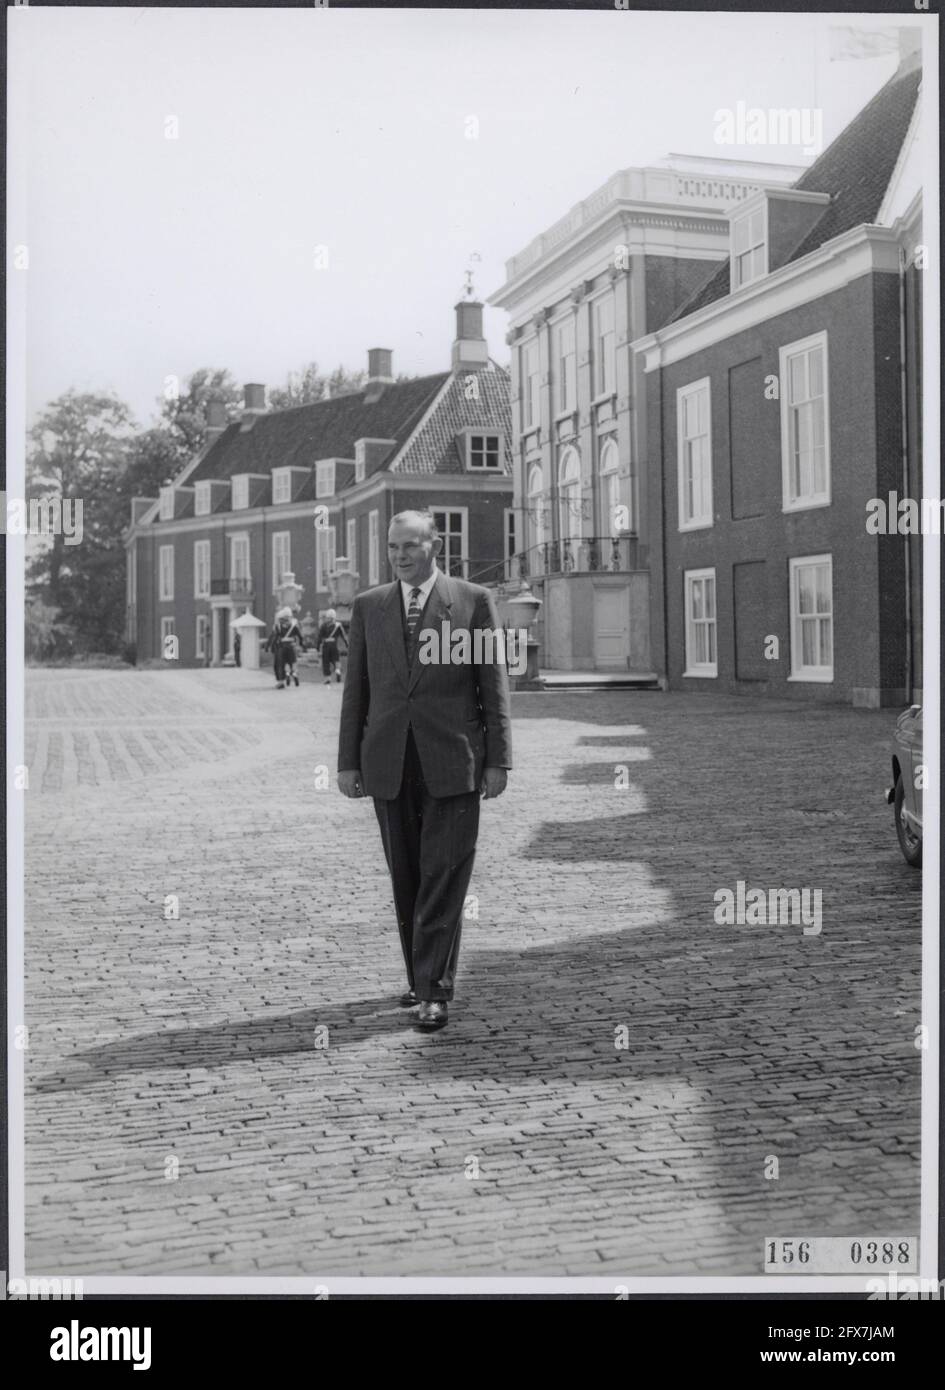 Collection Collection of photographs Netherlands Government Information Service Own, photo number 156-0388, 1956, The Netherlands, 20th century press agency photo, news to remember, documentary, historic photography 1945-1990, visual stories, human history of the Twentieth Century, capturing moments in time Stock Photo